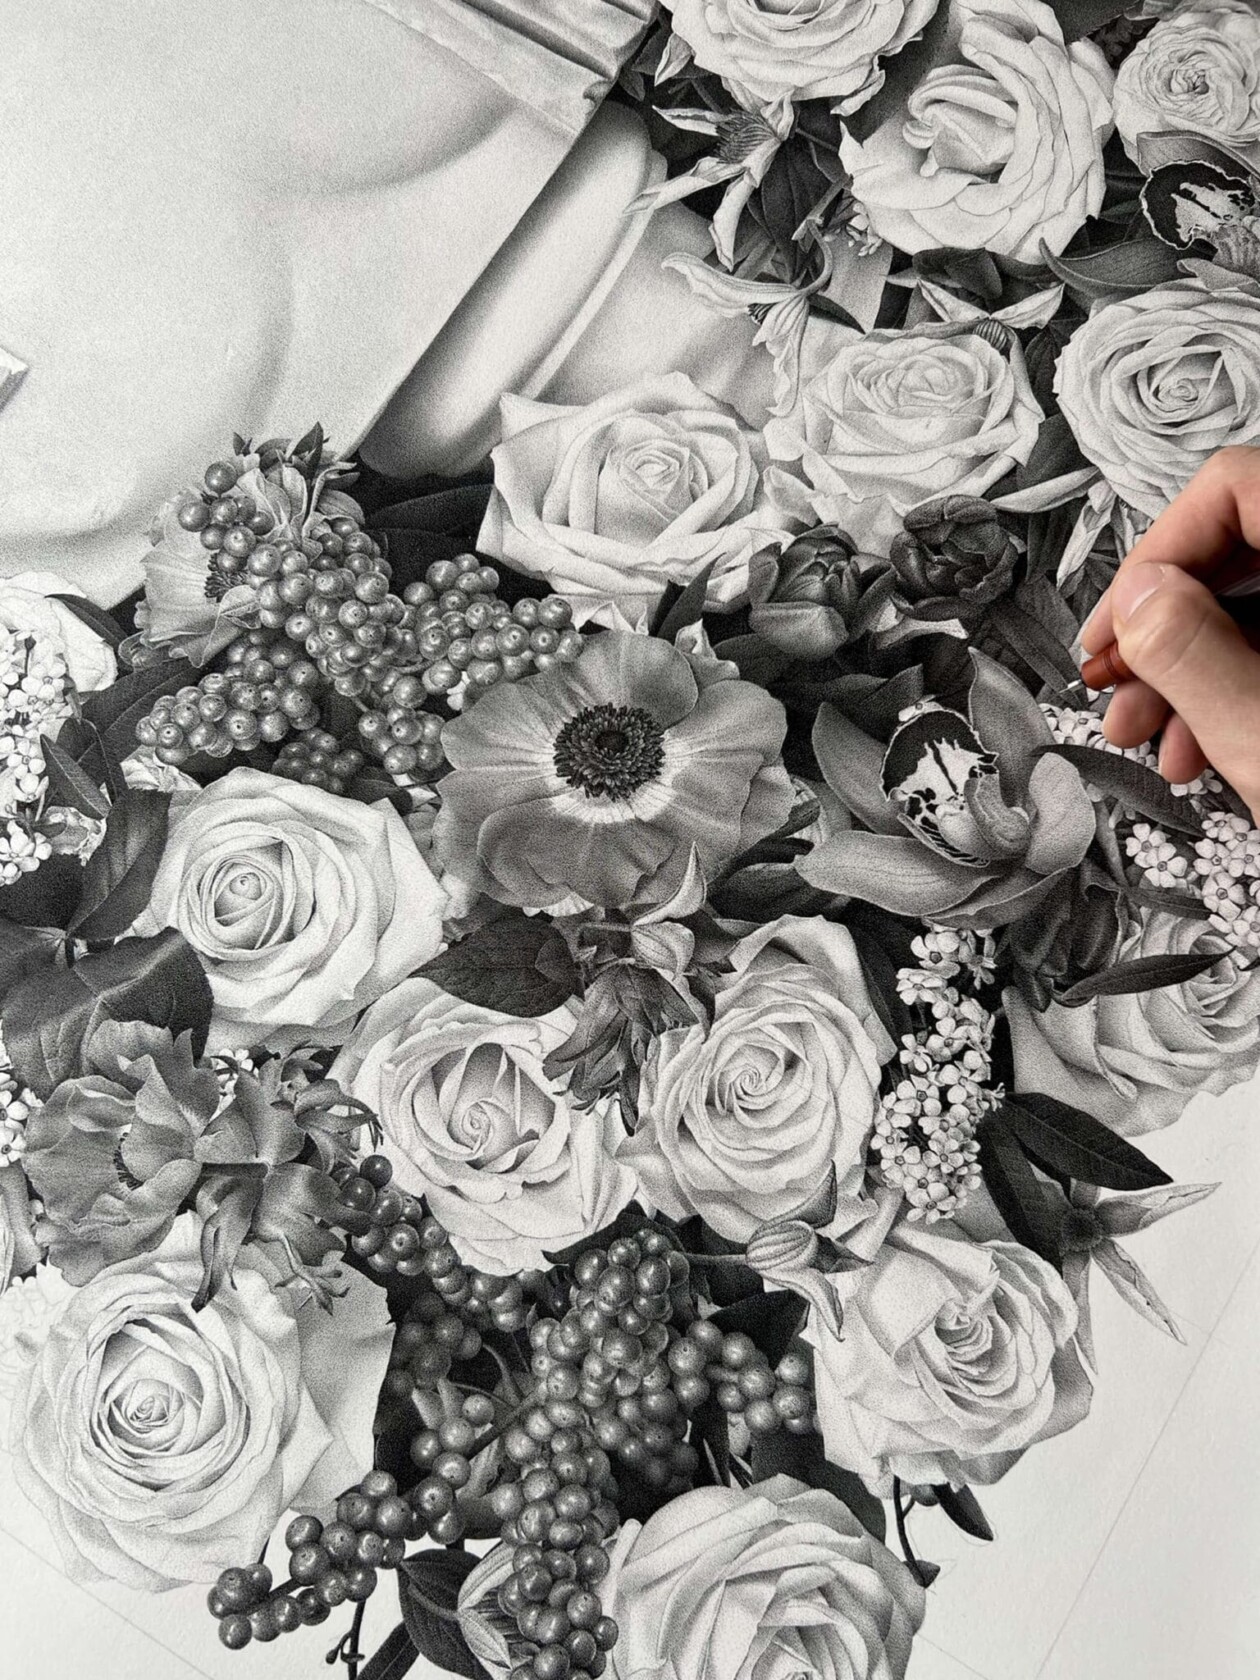 Detailed Stipple Illustrations Made Of Tens Of Millions Of Ink Dots By Xavier Casalta (16)